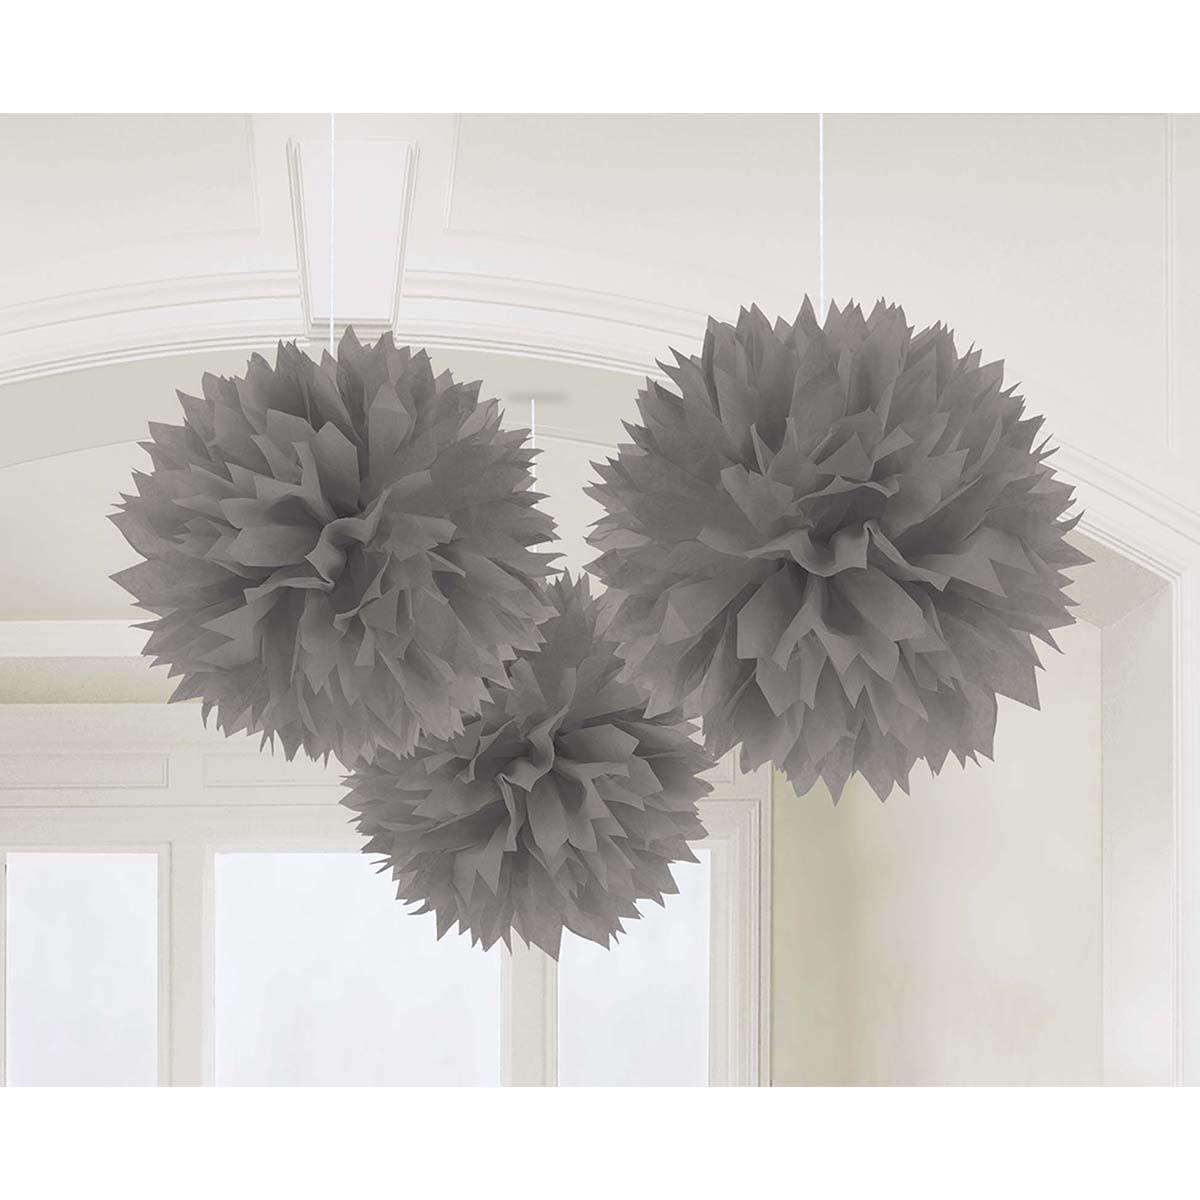 Buy Decorations Fluffy Decorations - Silver 3/pkg. sold at Party Expert